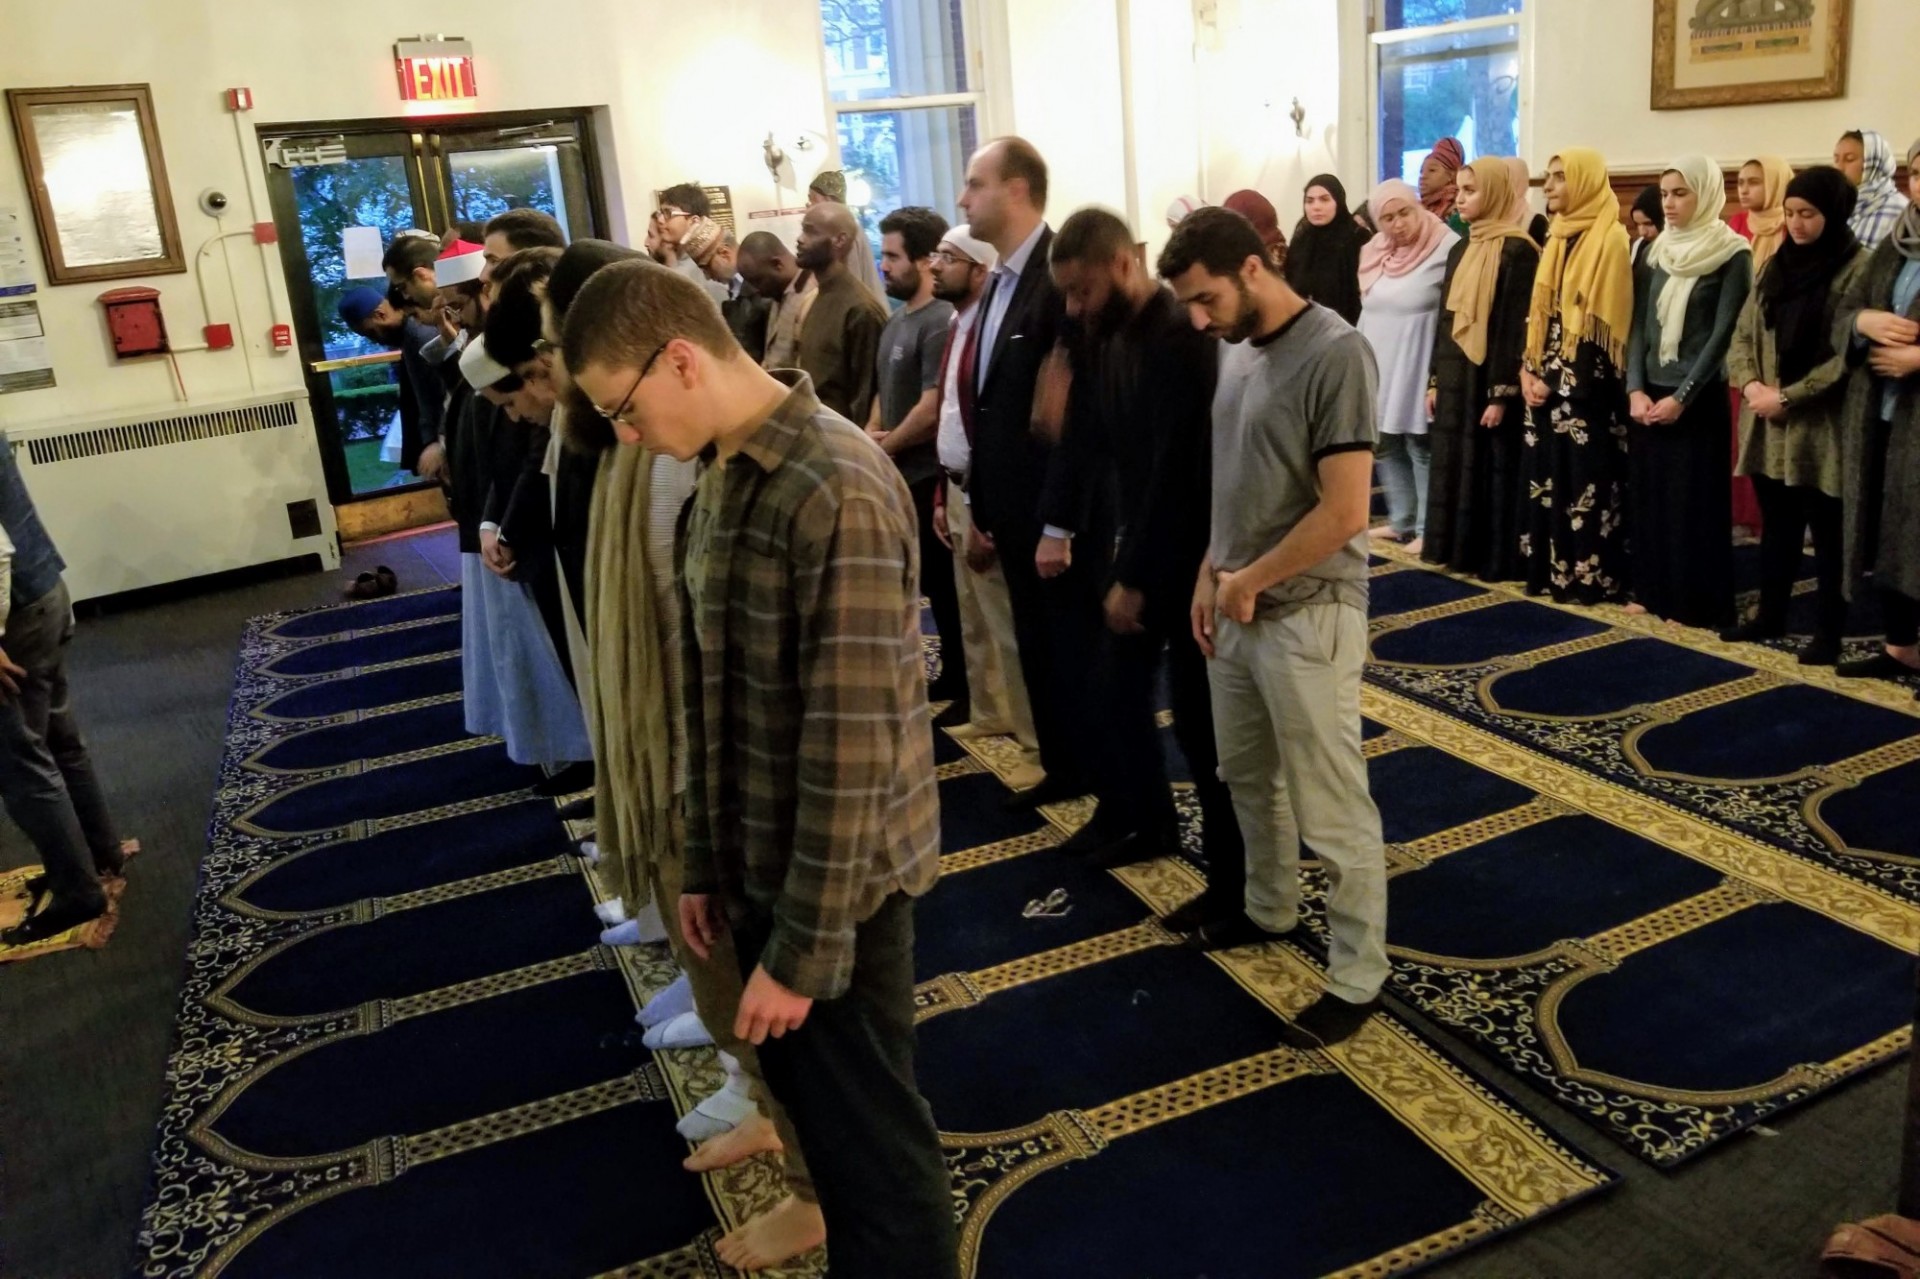 Muslim students and community members praying in the lobby in Earl Hall.